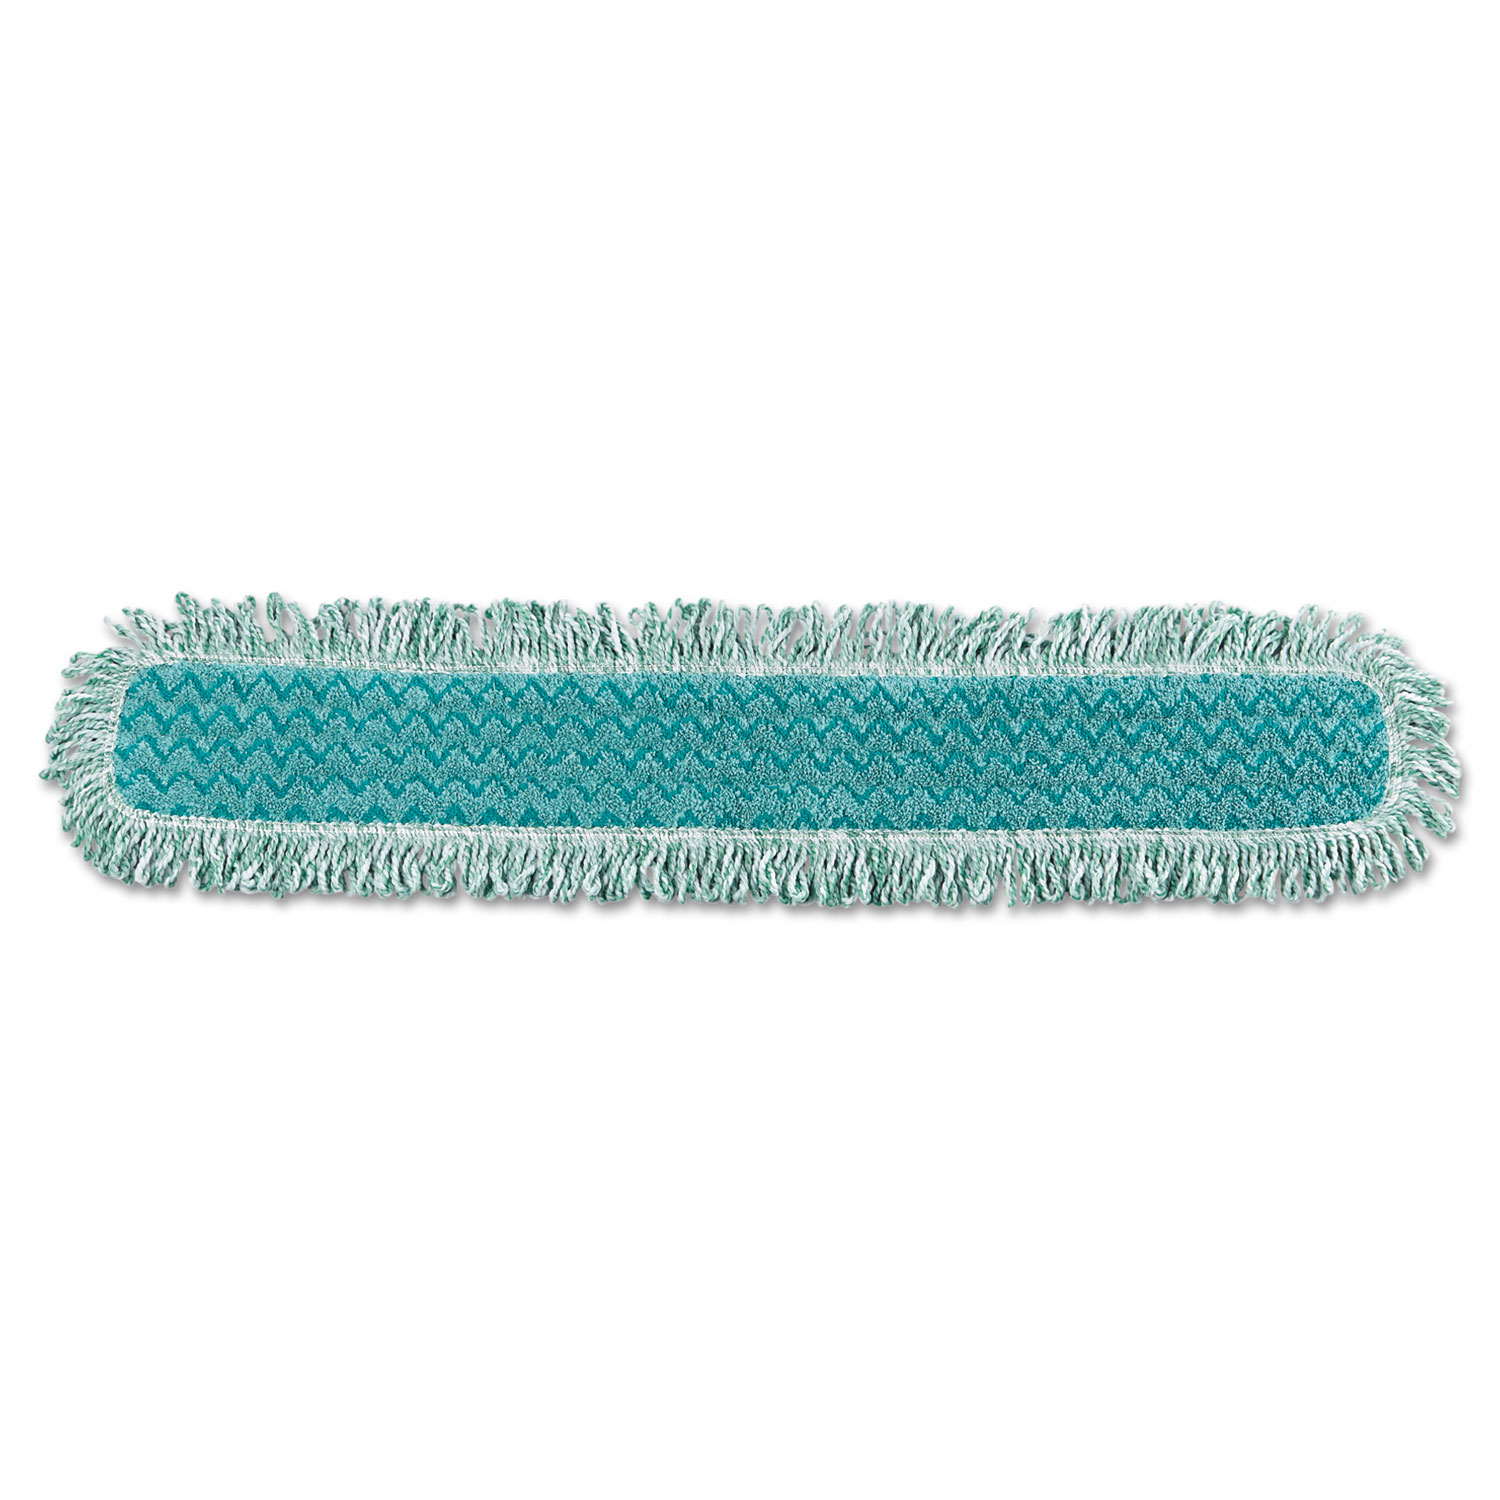  Rubbermaid Commercial HYGEN FGQ43800GR00 HYGEN Dry Dusting Mop Heads with Fringe, 36, Microfiber, Green (RCPQ438) 